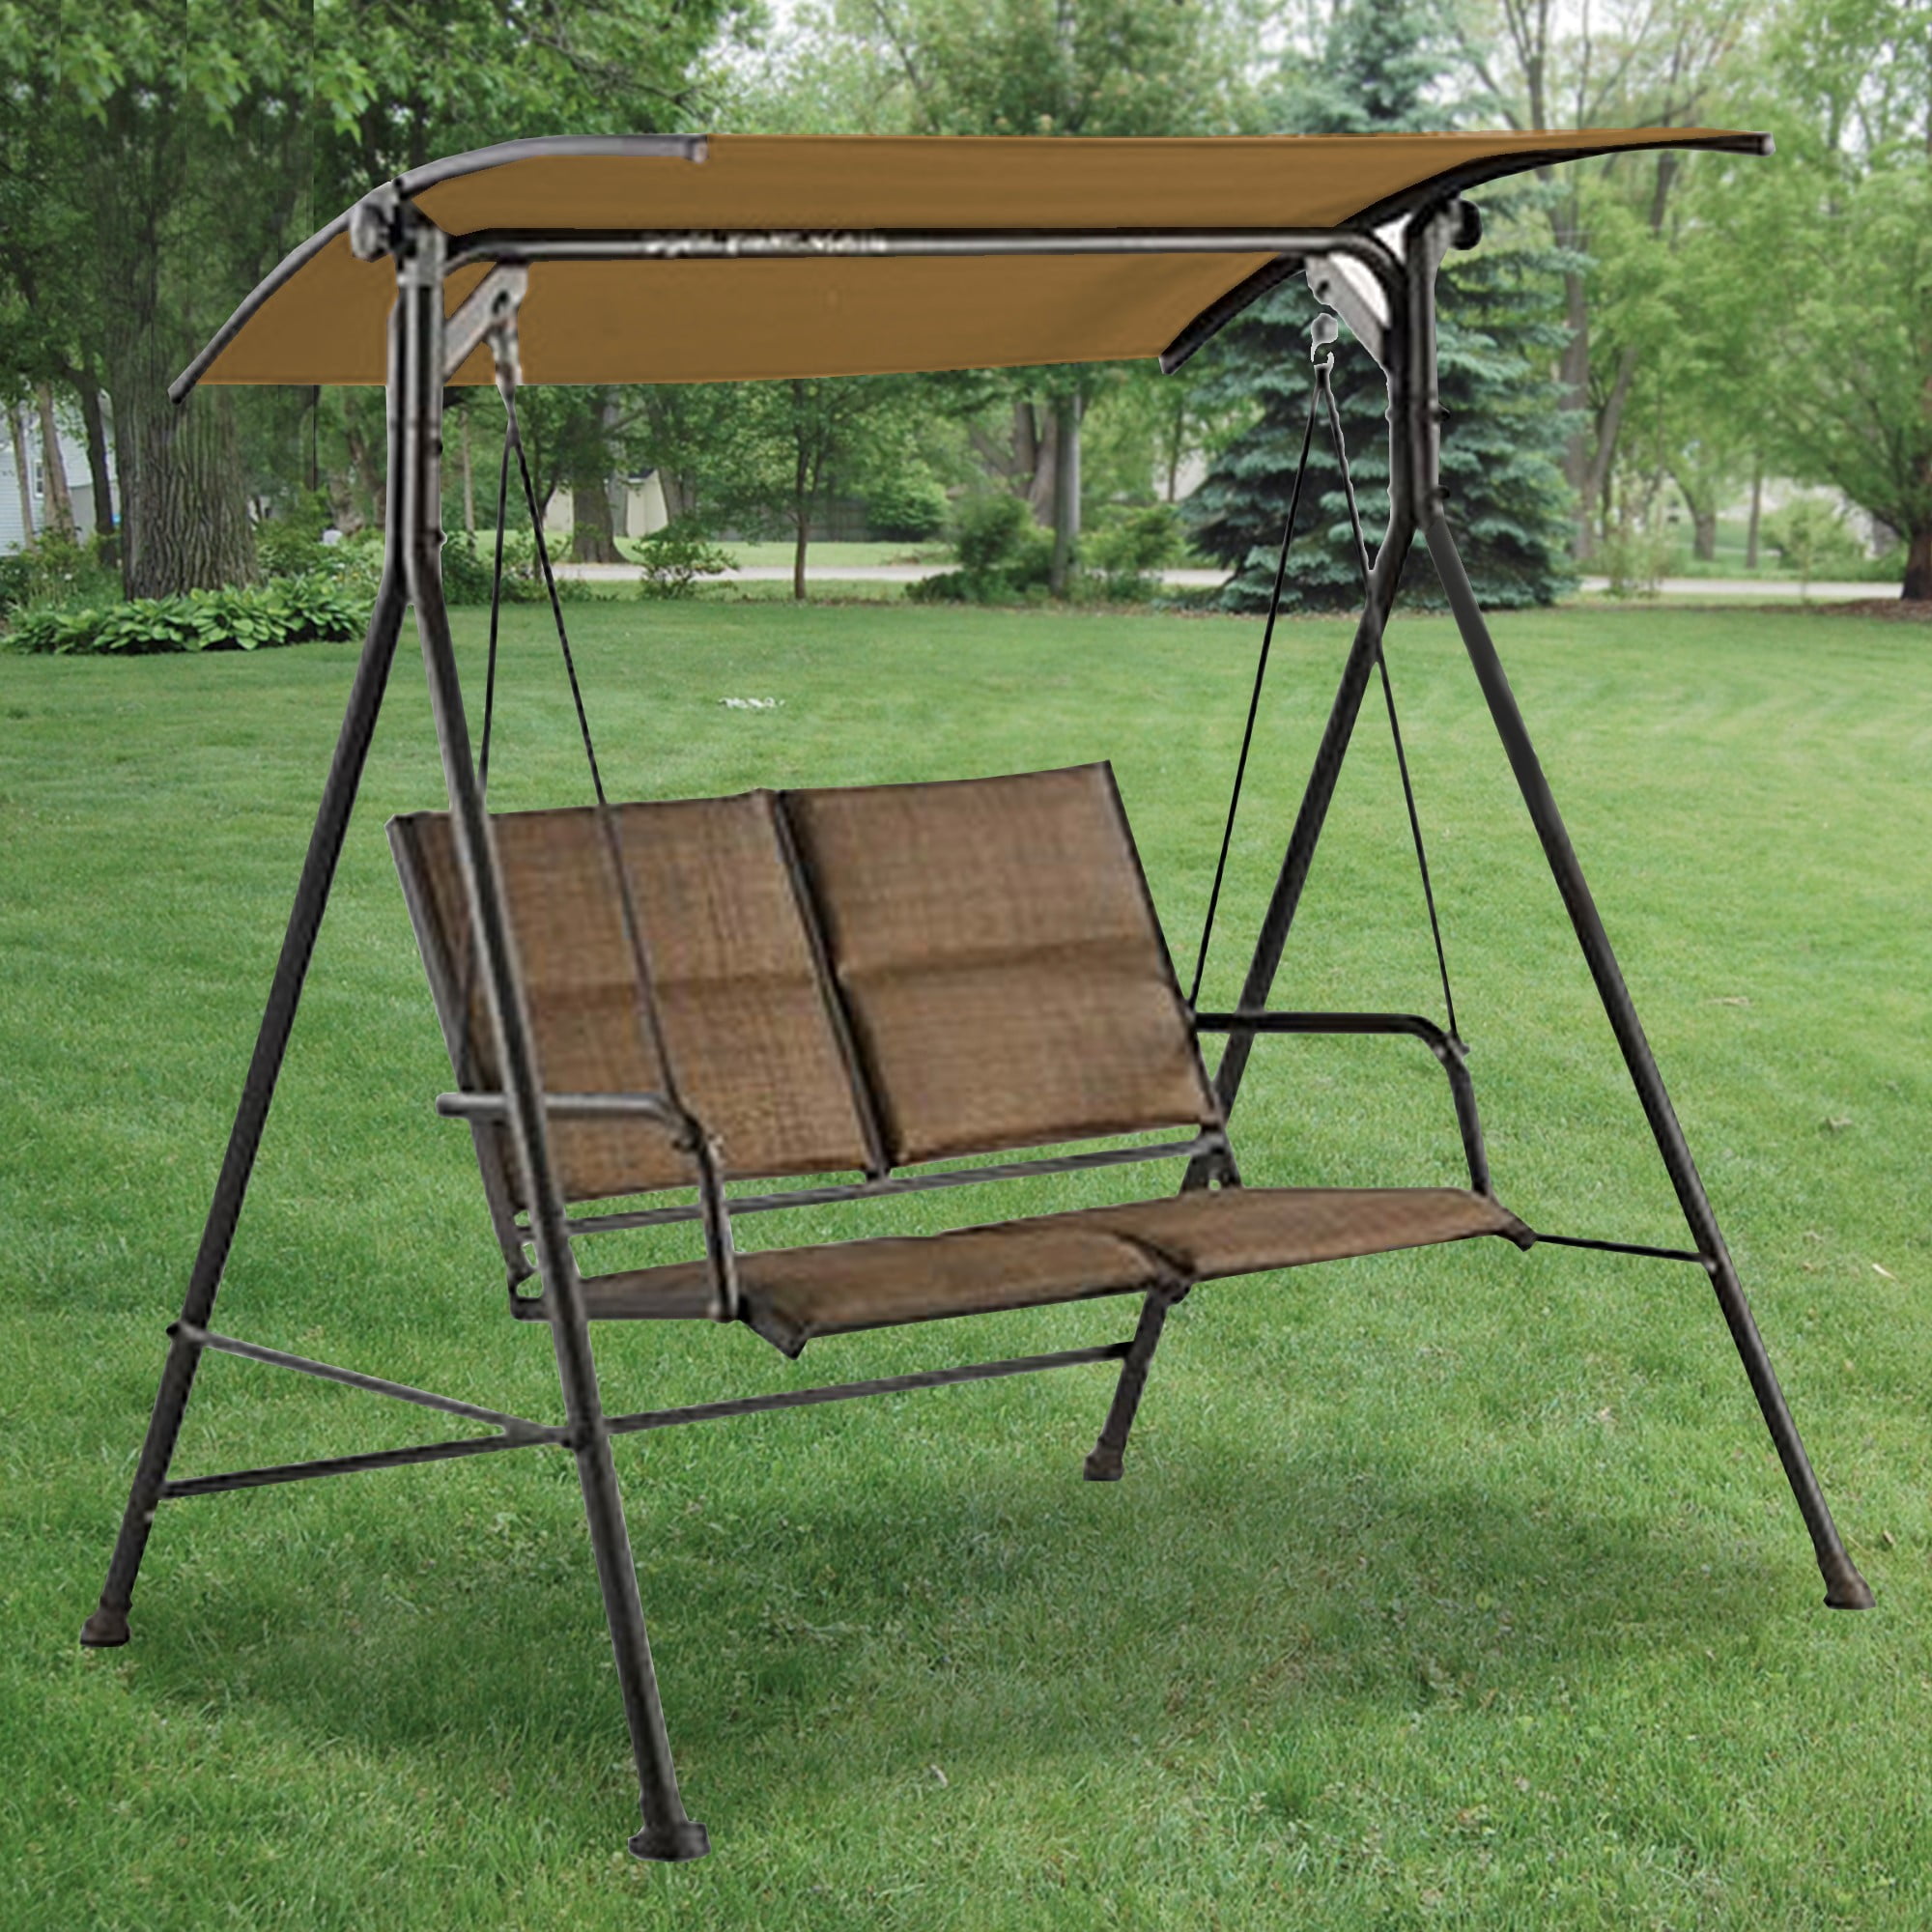 Details about   Garden Hammock Cover Replacement Canopy For Swing Seat 2 & 3 Seater Sizes Decor 